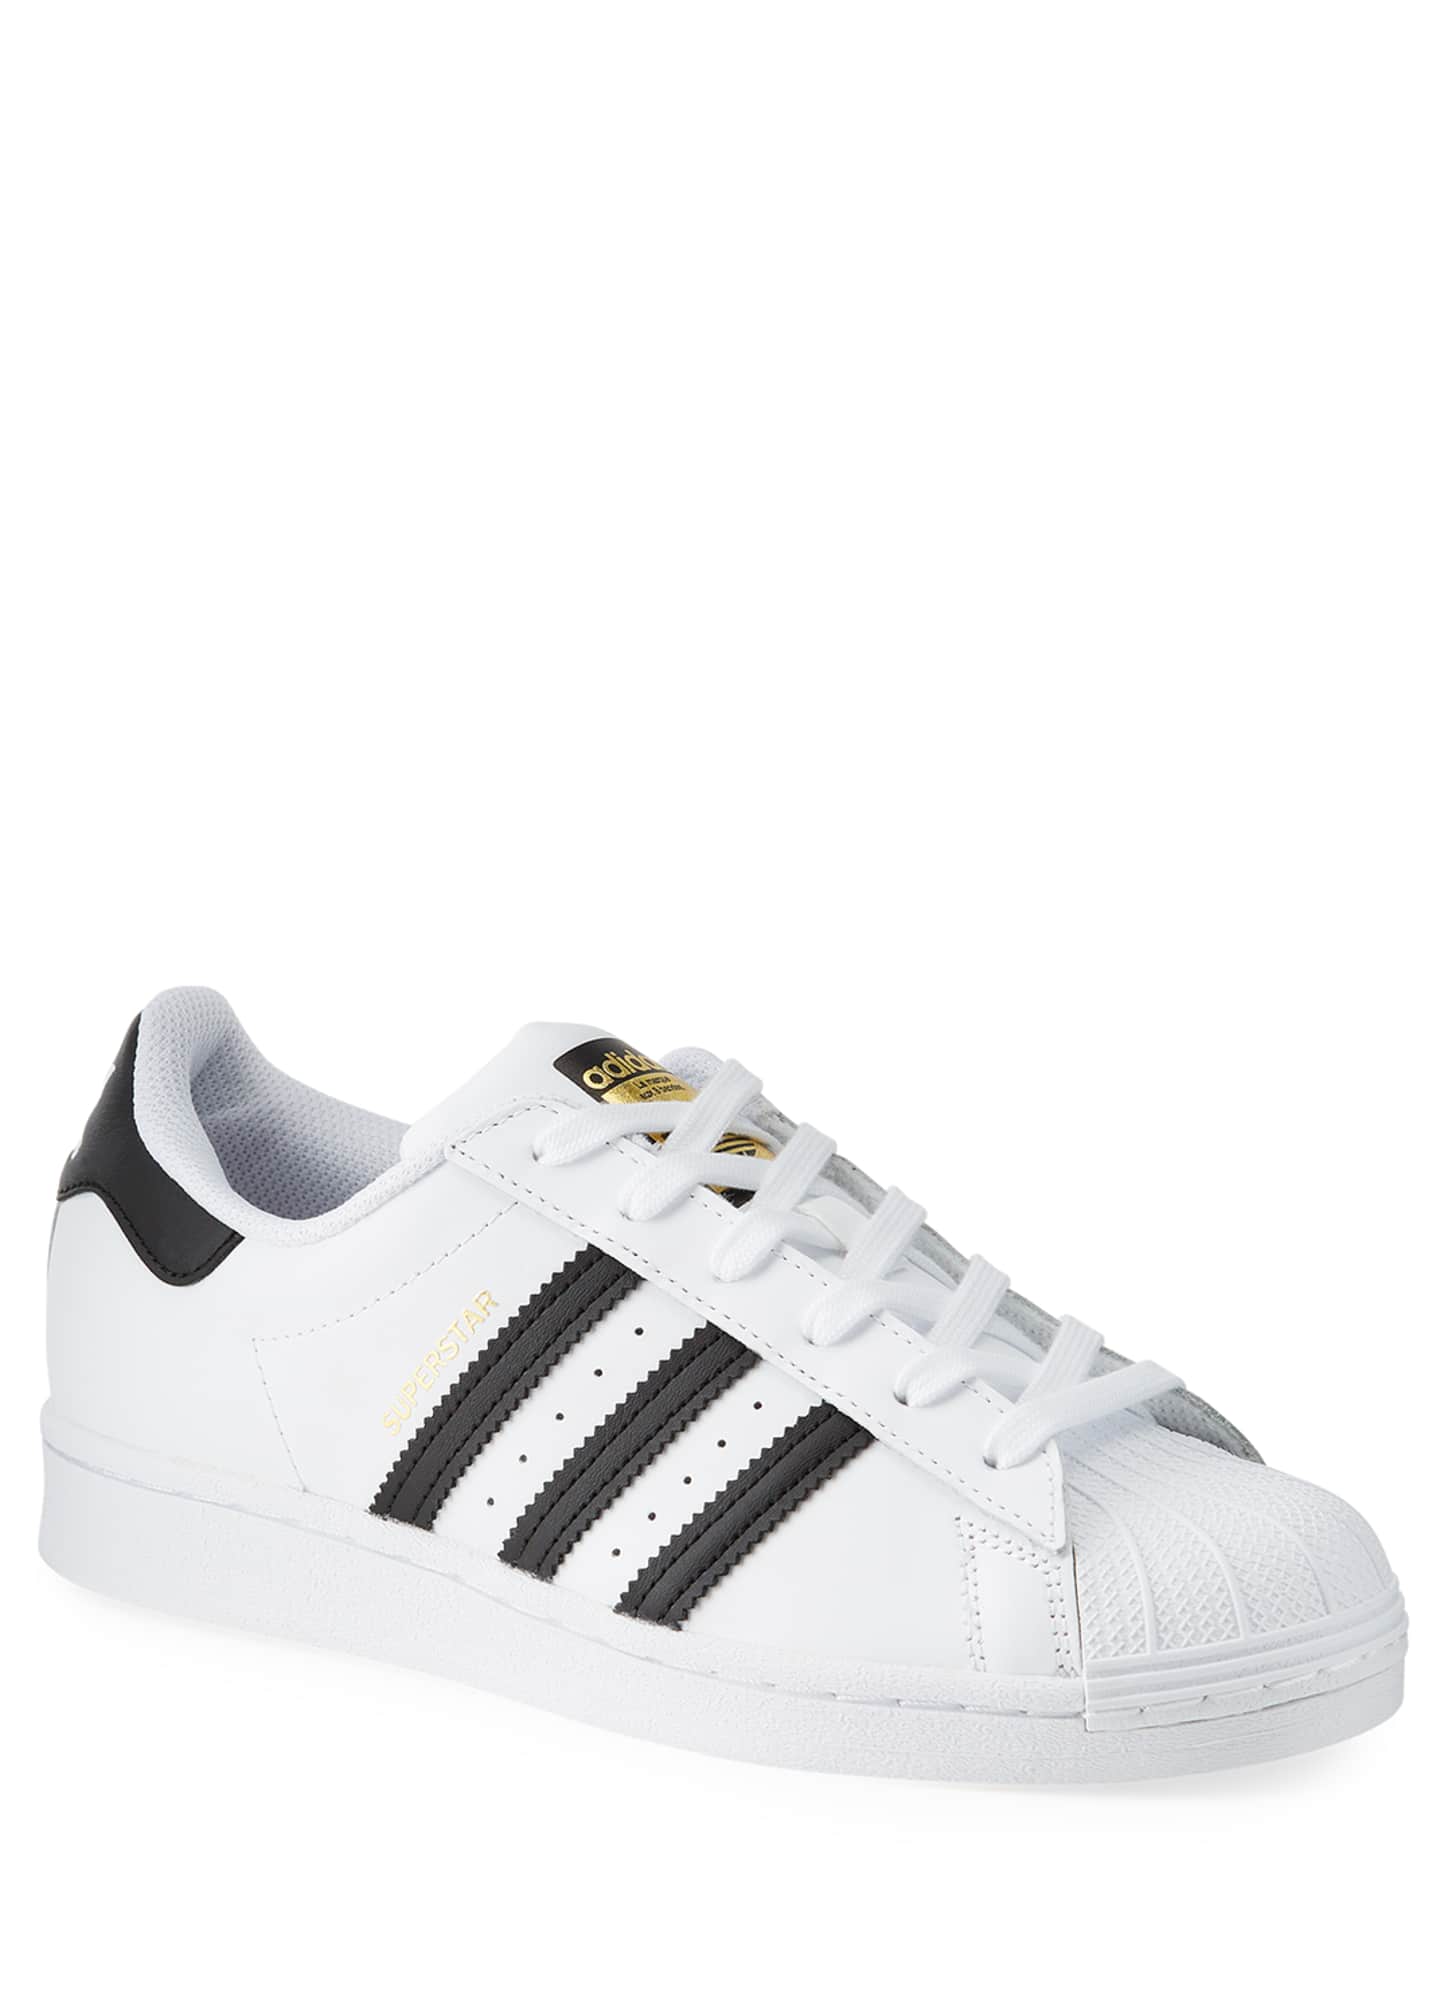 adidas superstar classic shoes